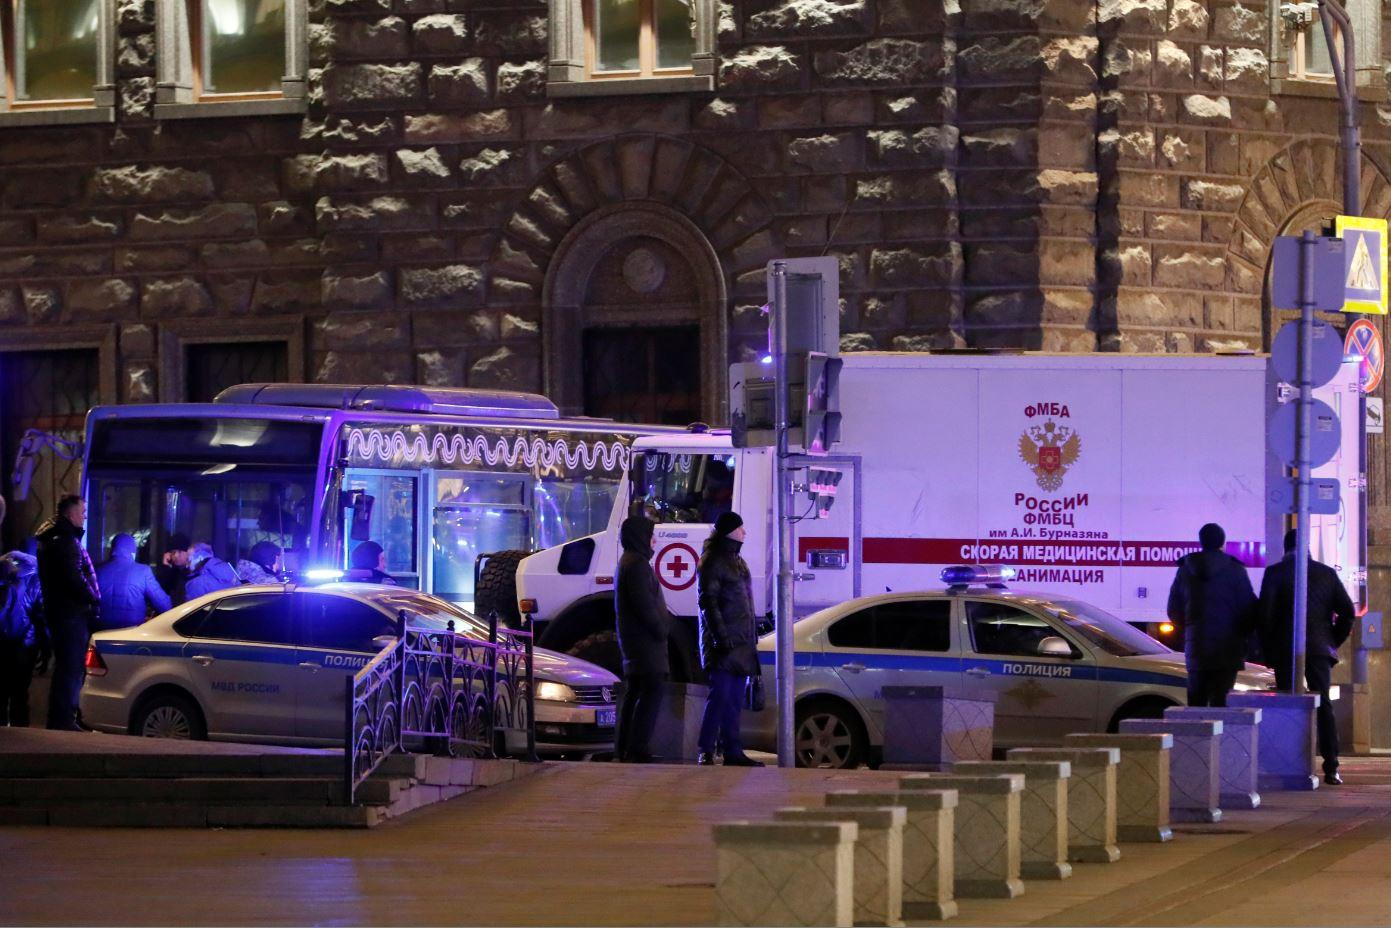 Moscow shooting suspect named; death toll now at 2 GMA News Online